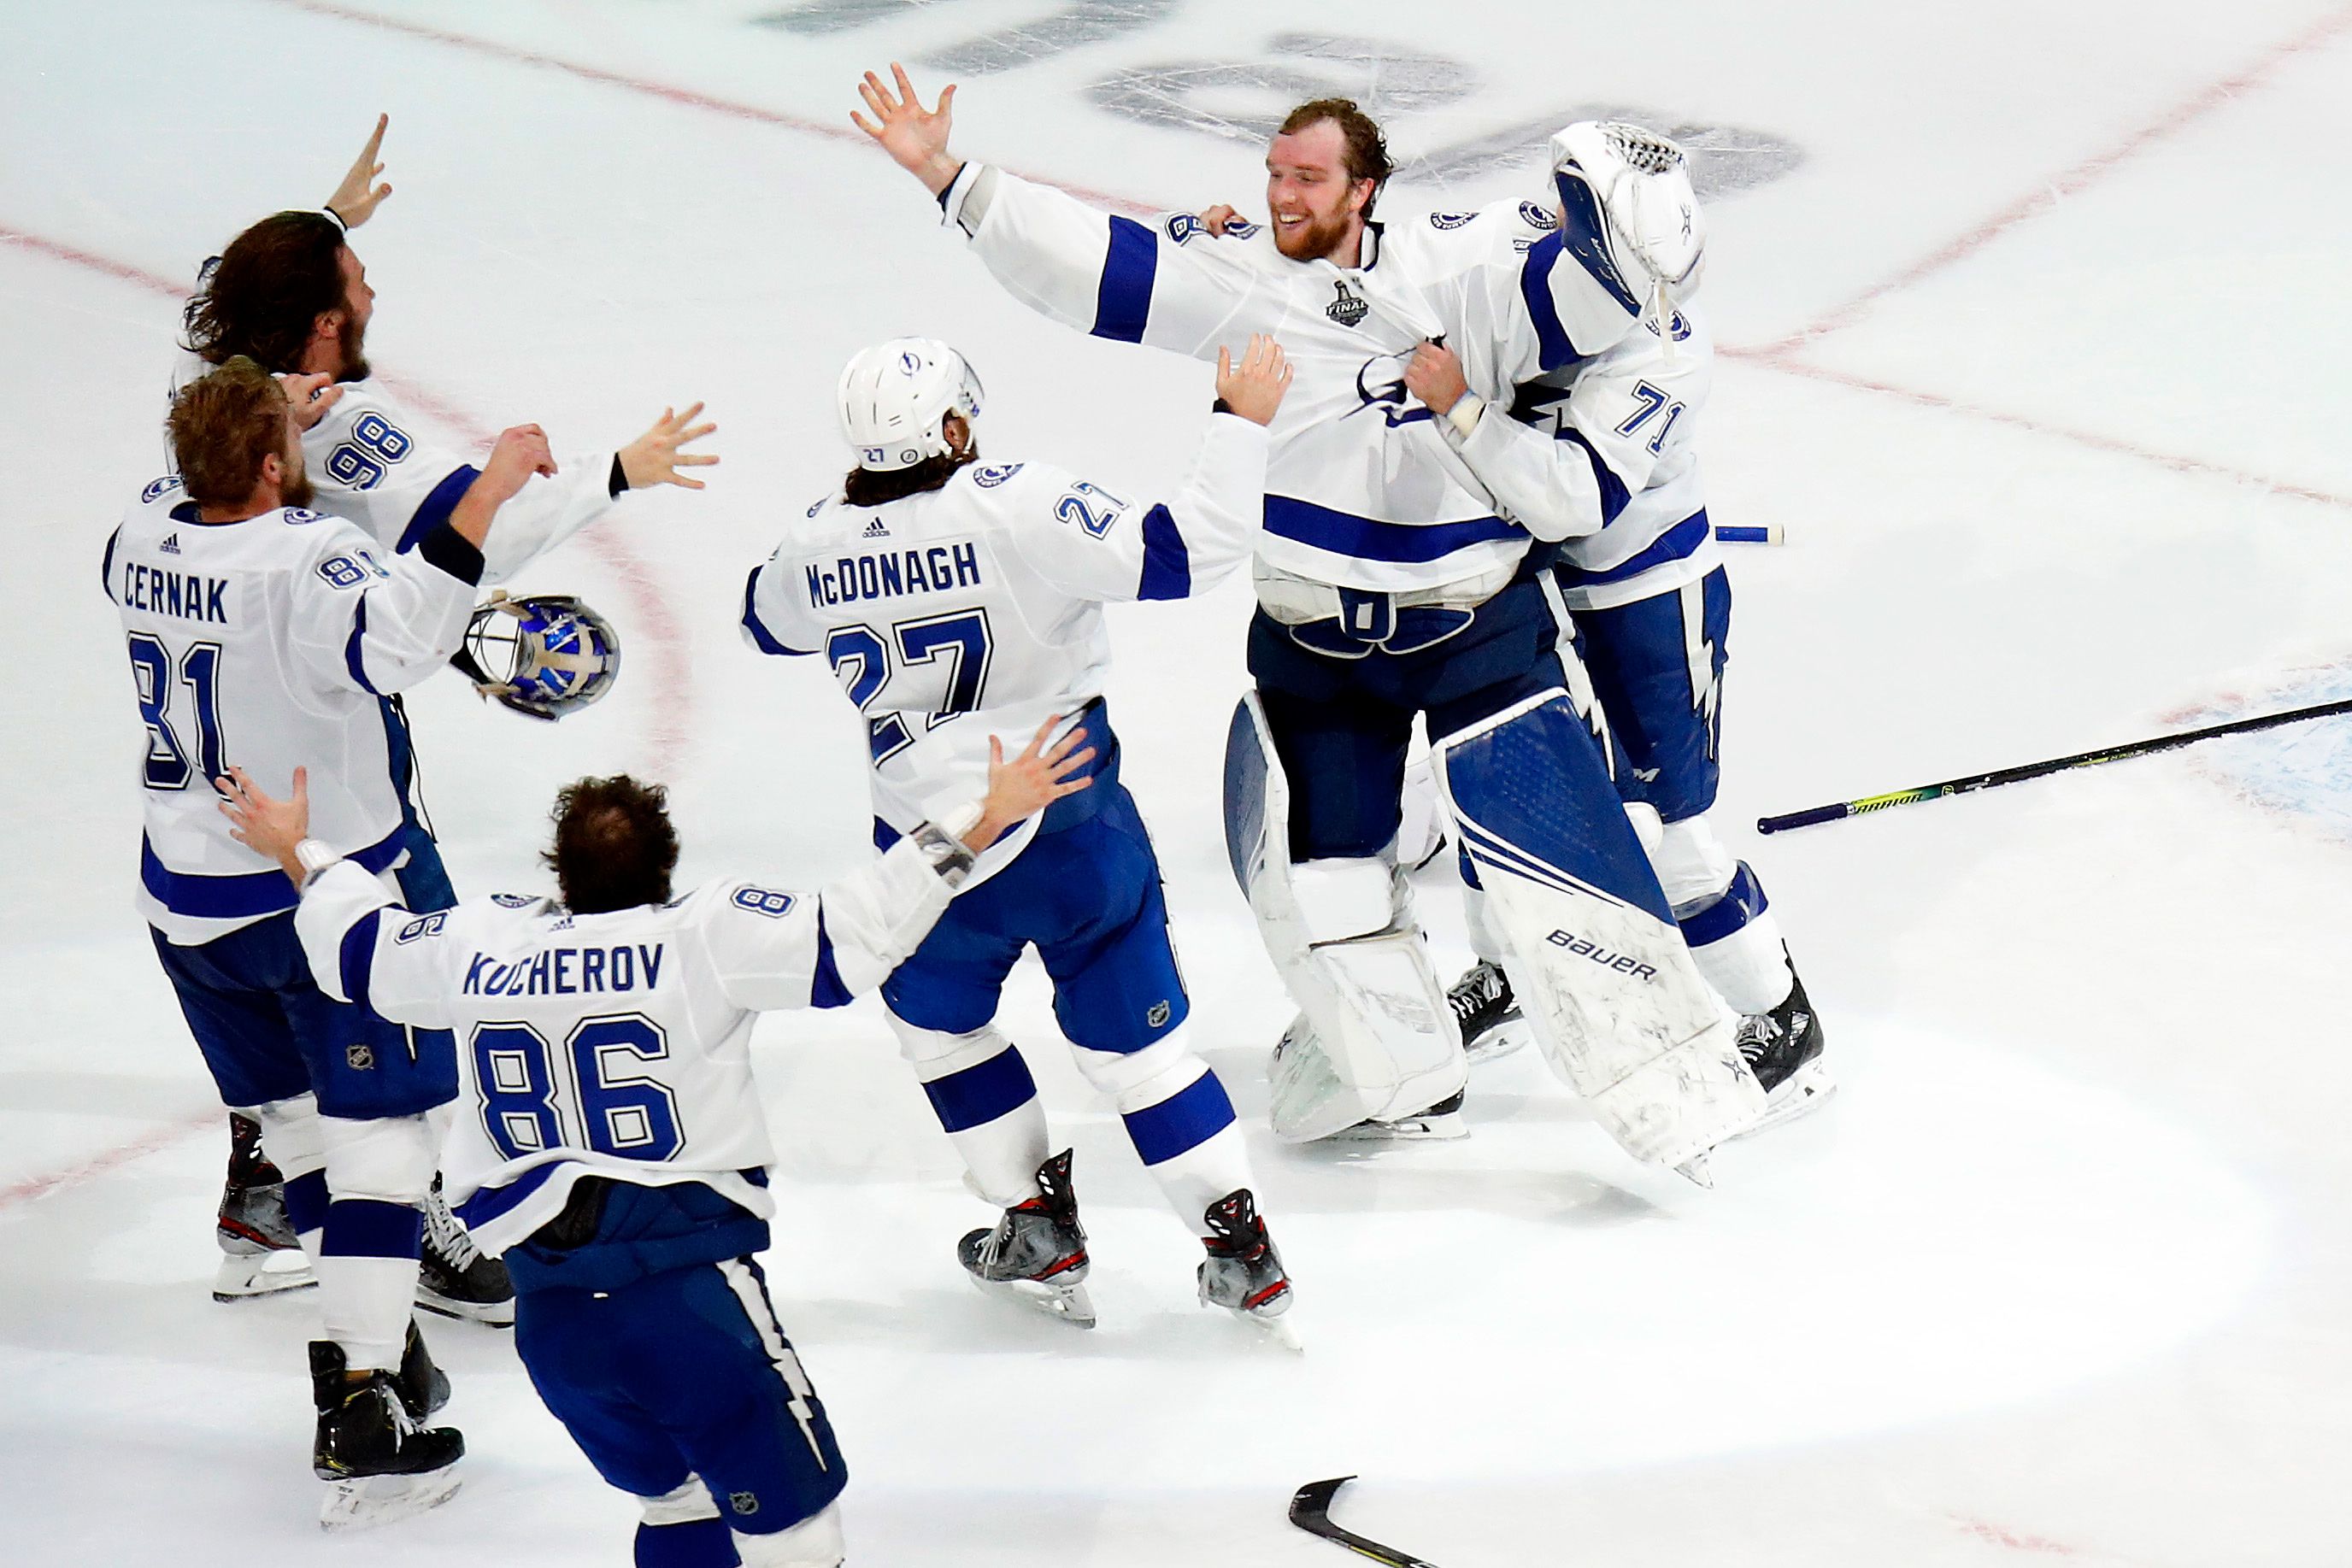 Tampa Bay Lightning win the NHL's Stanley Cup